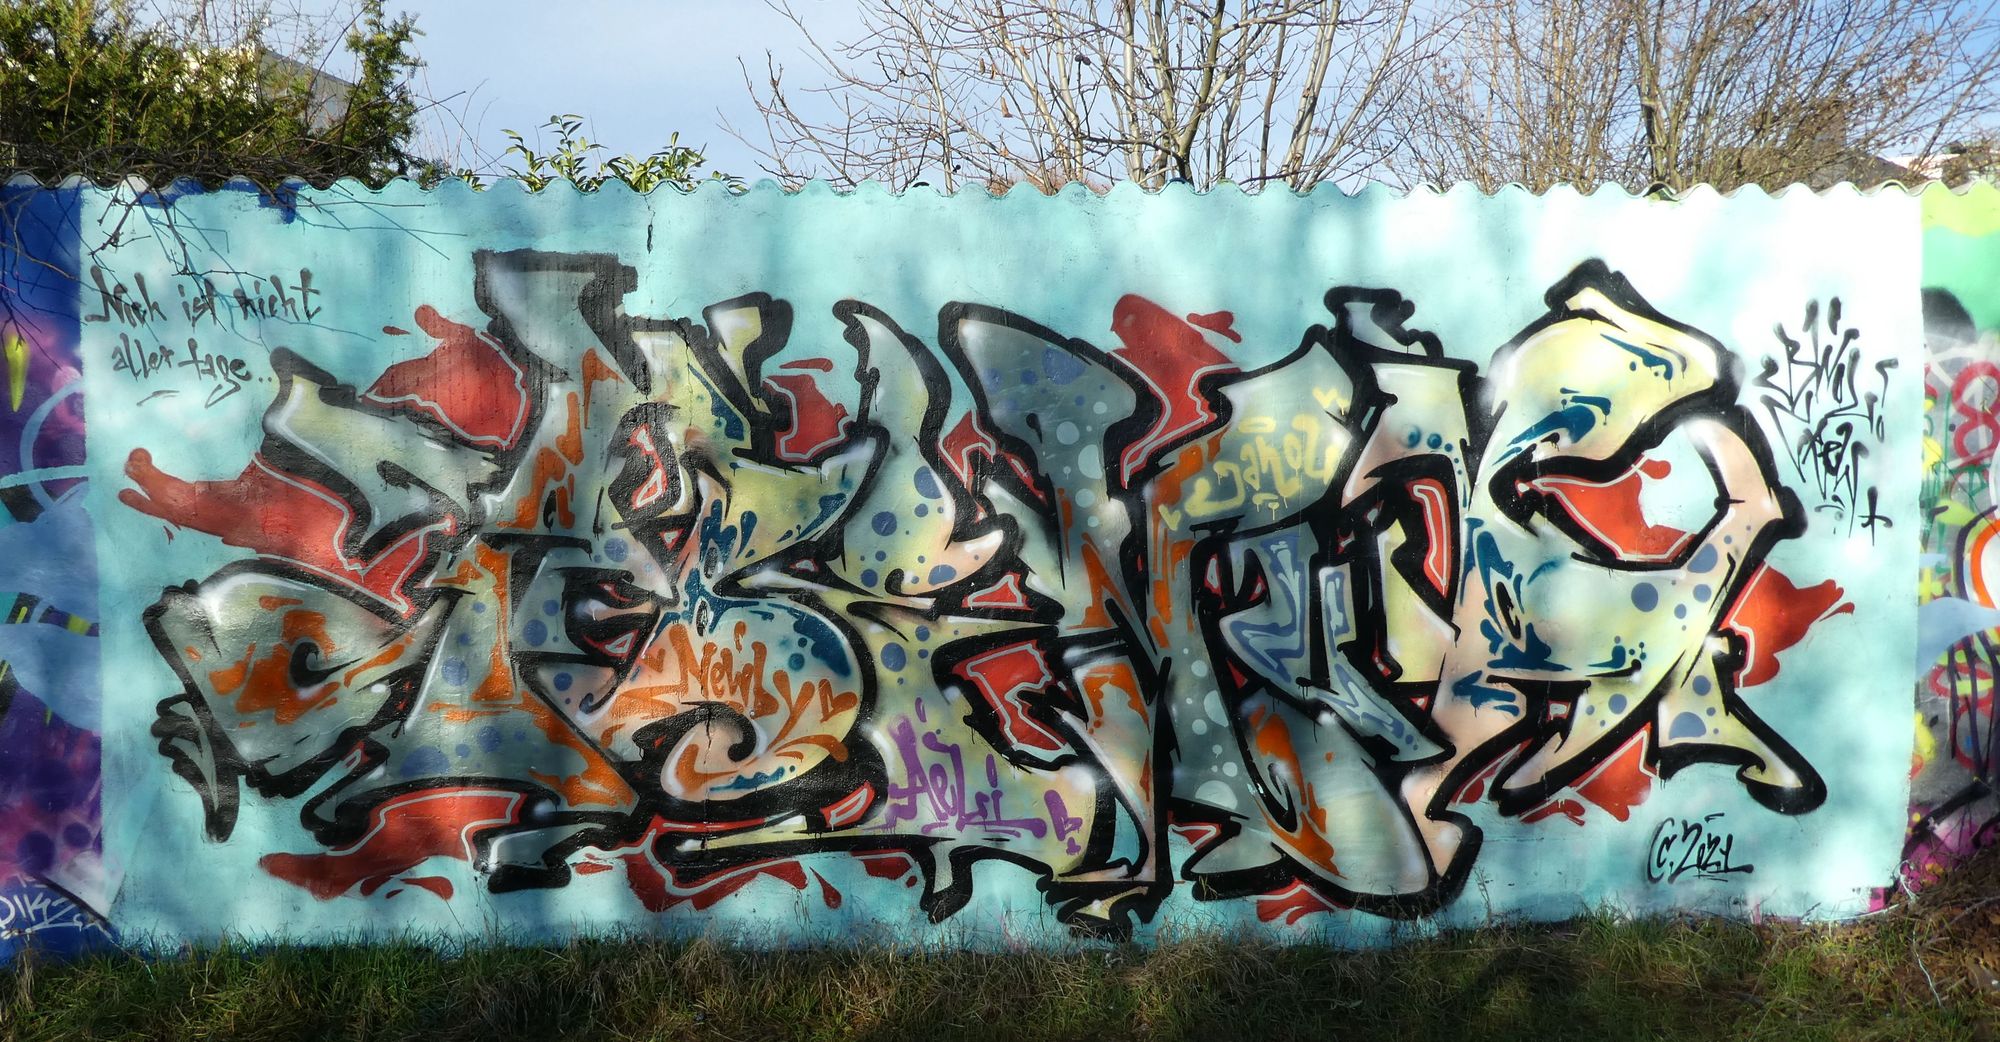 Graffiti Worms Hall of Fame 31. Dezember 2021